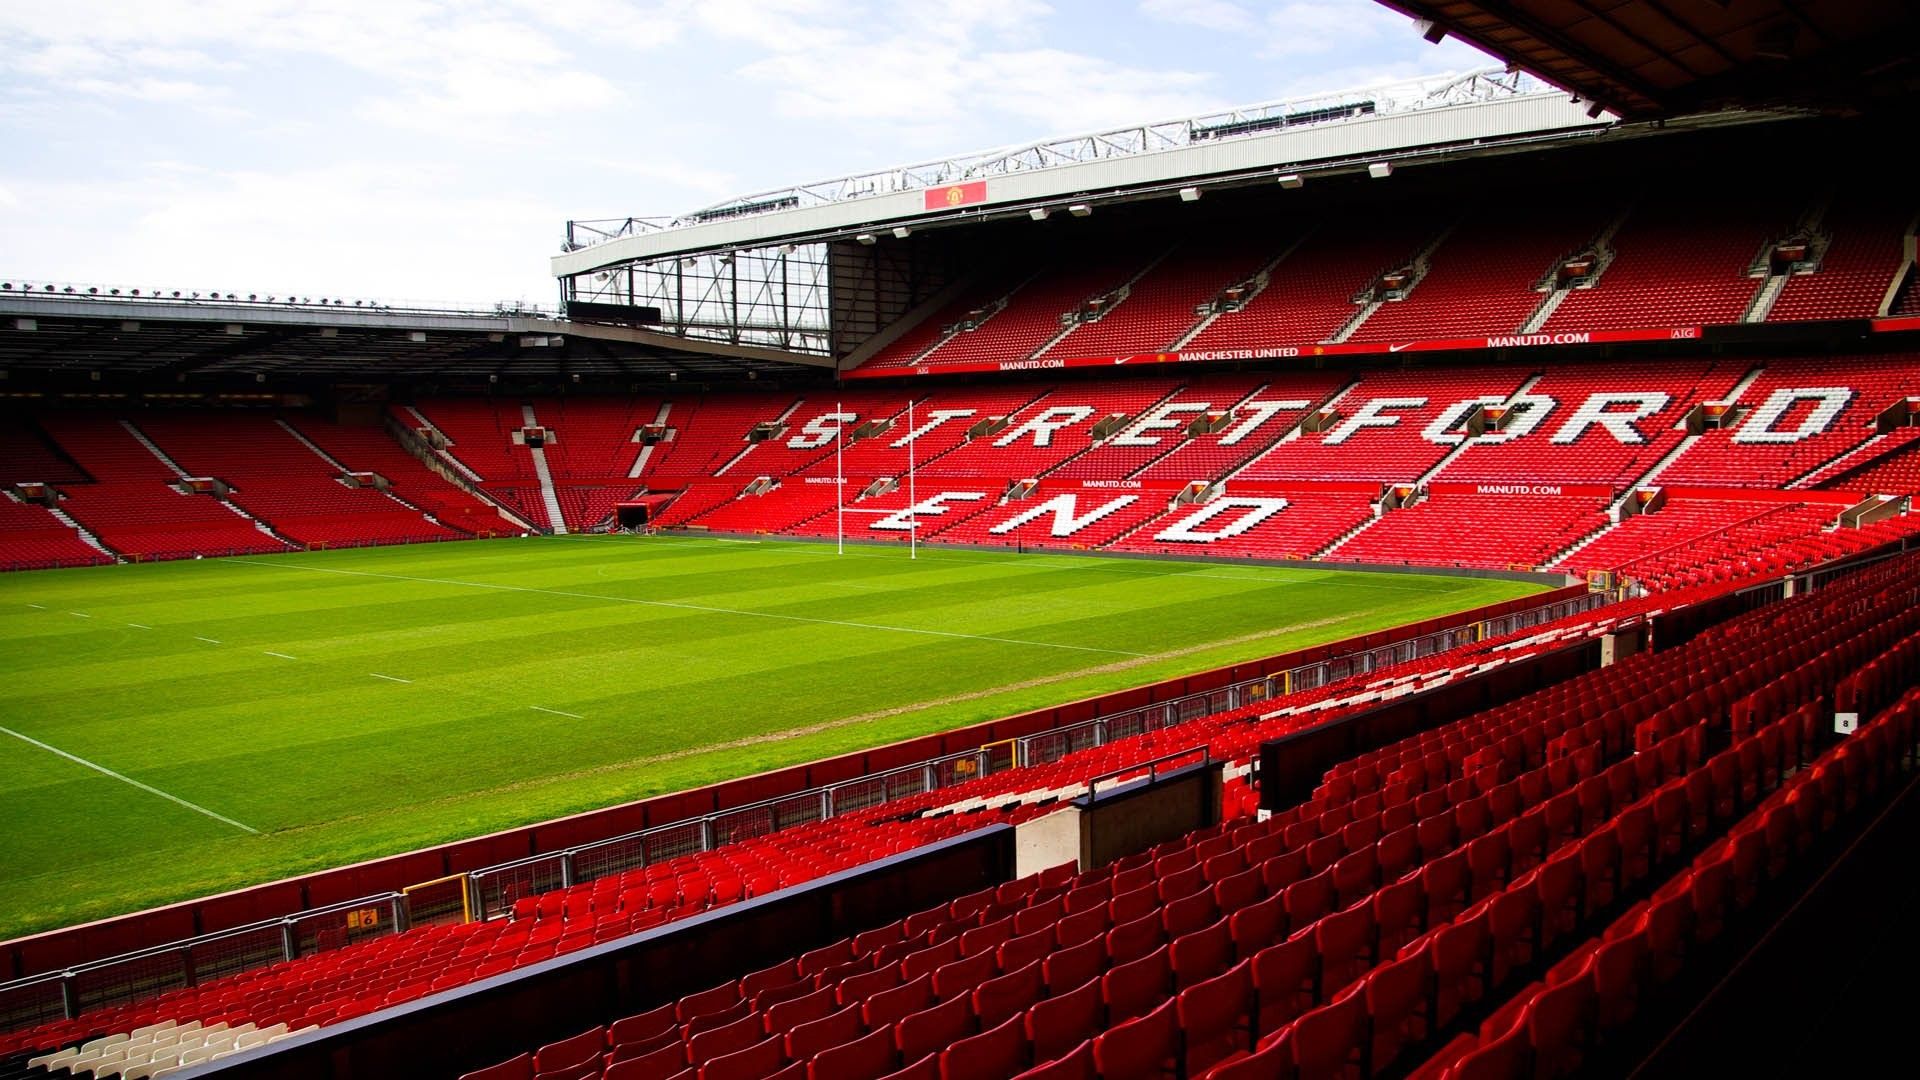 Old Trafford Stadium - Home of Manchester United